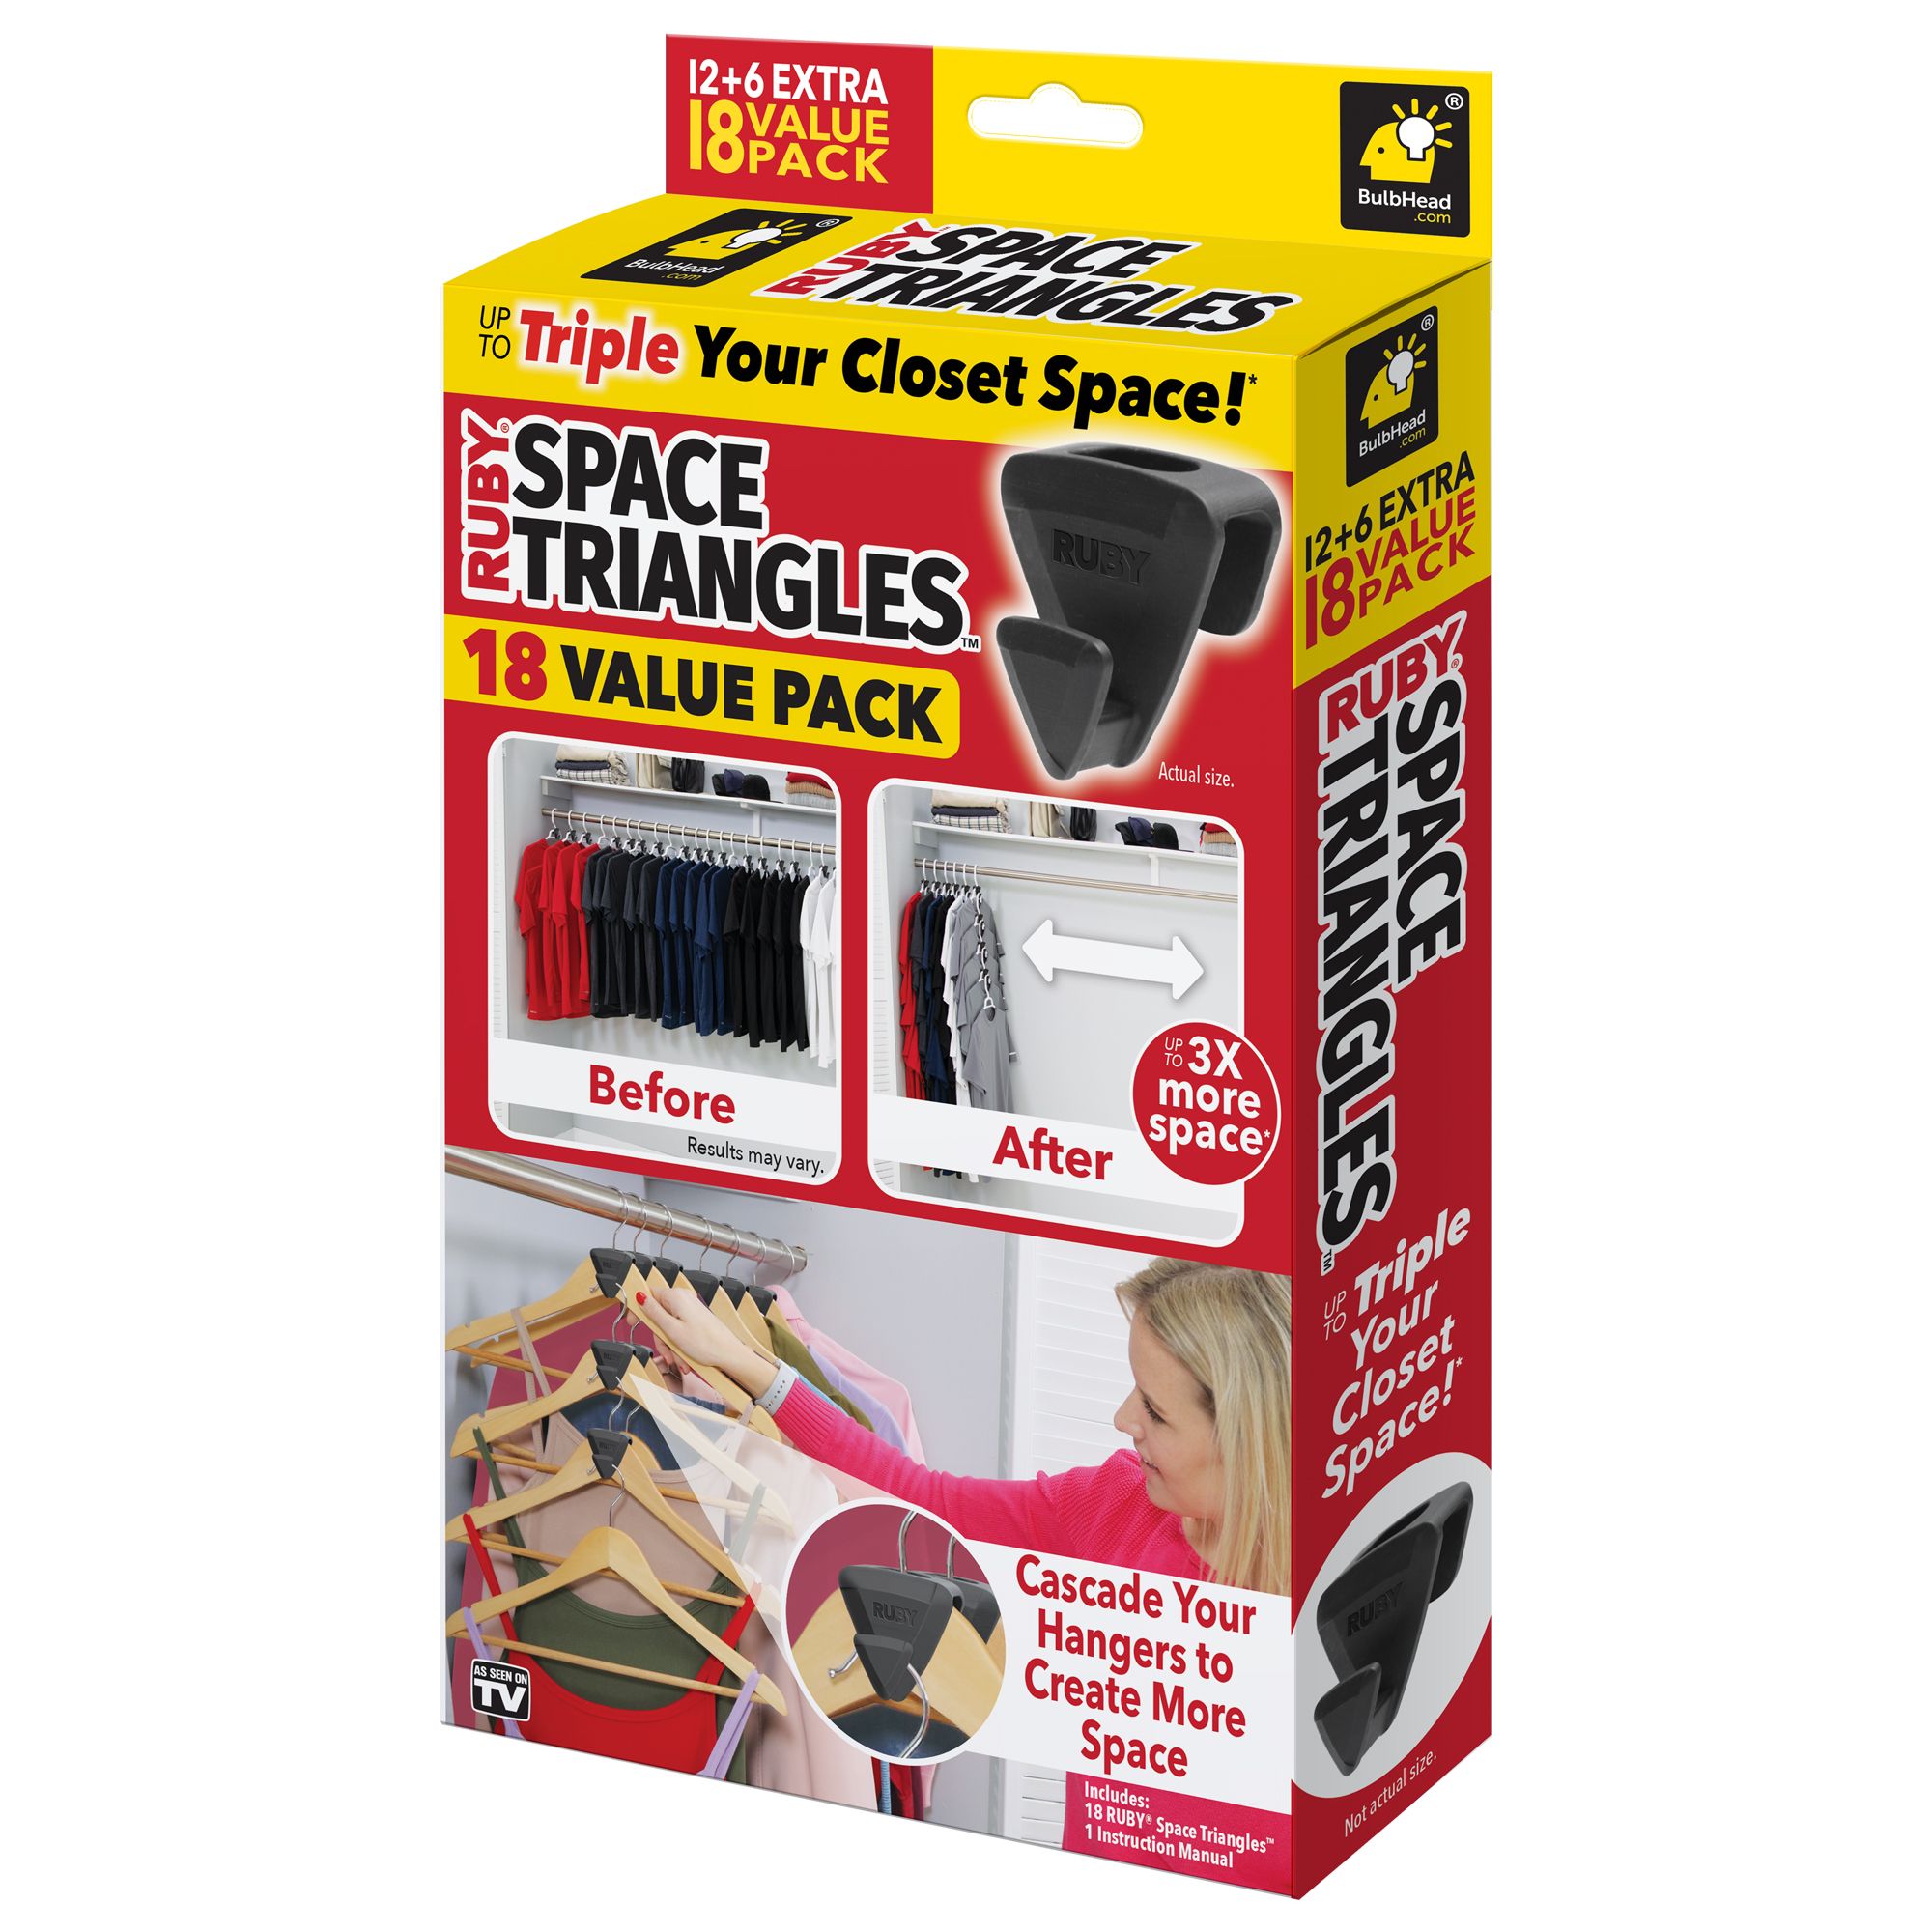 MagicBag Instant Space Combo Pack, 10 ct